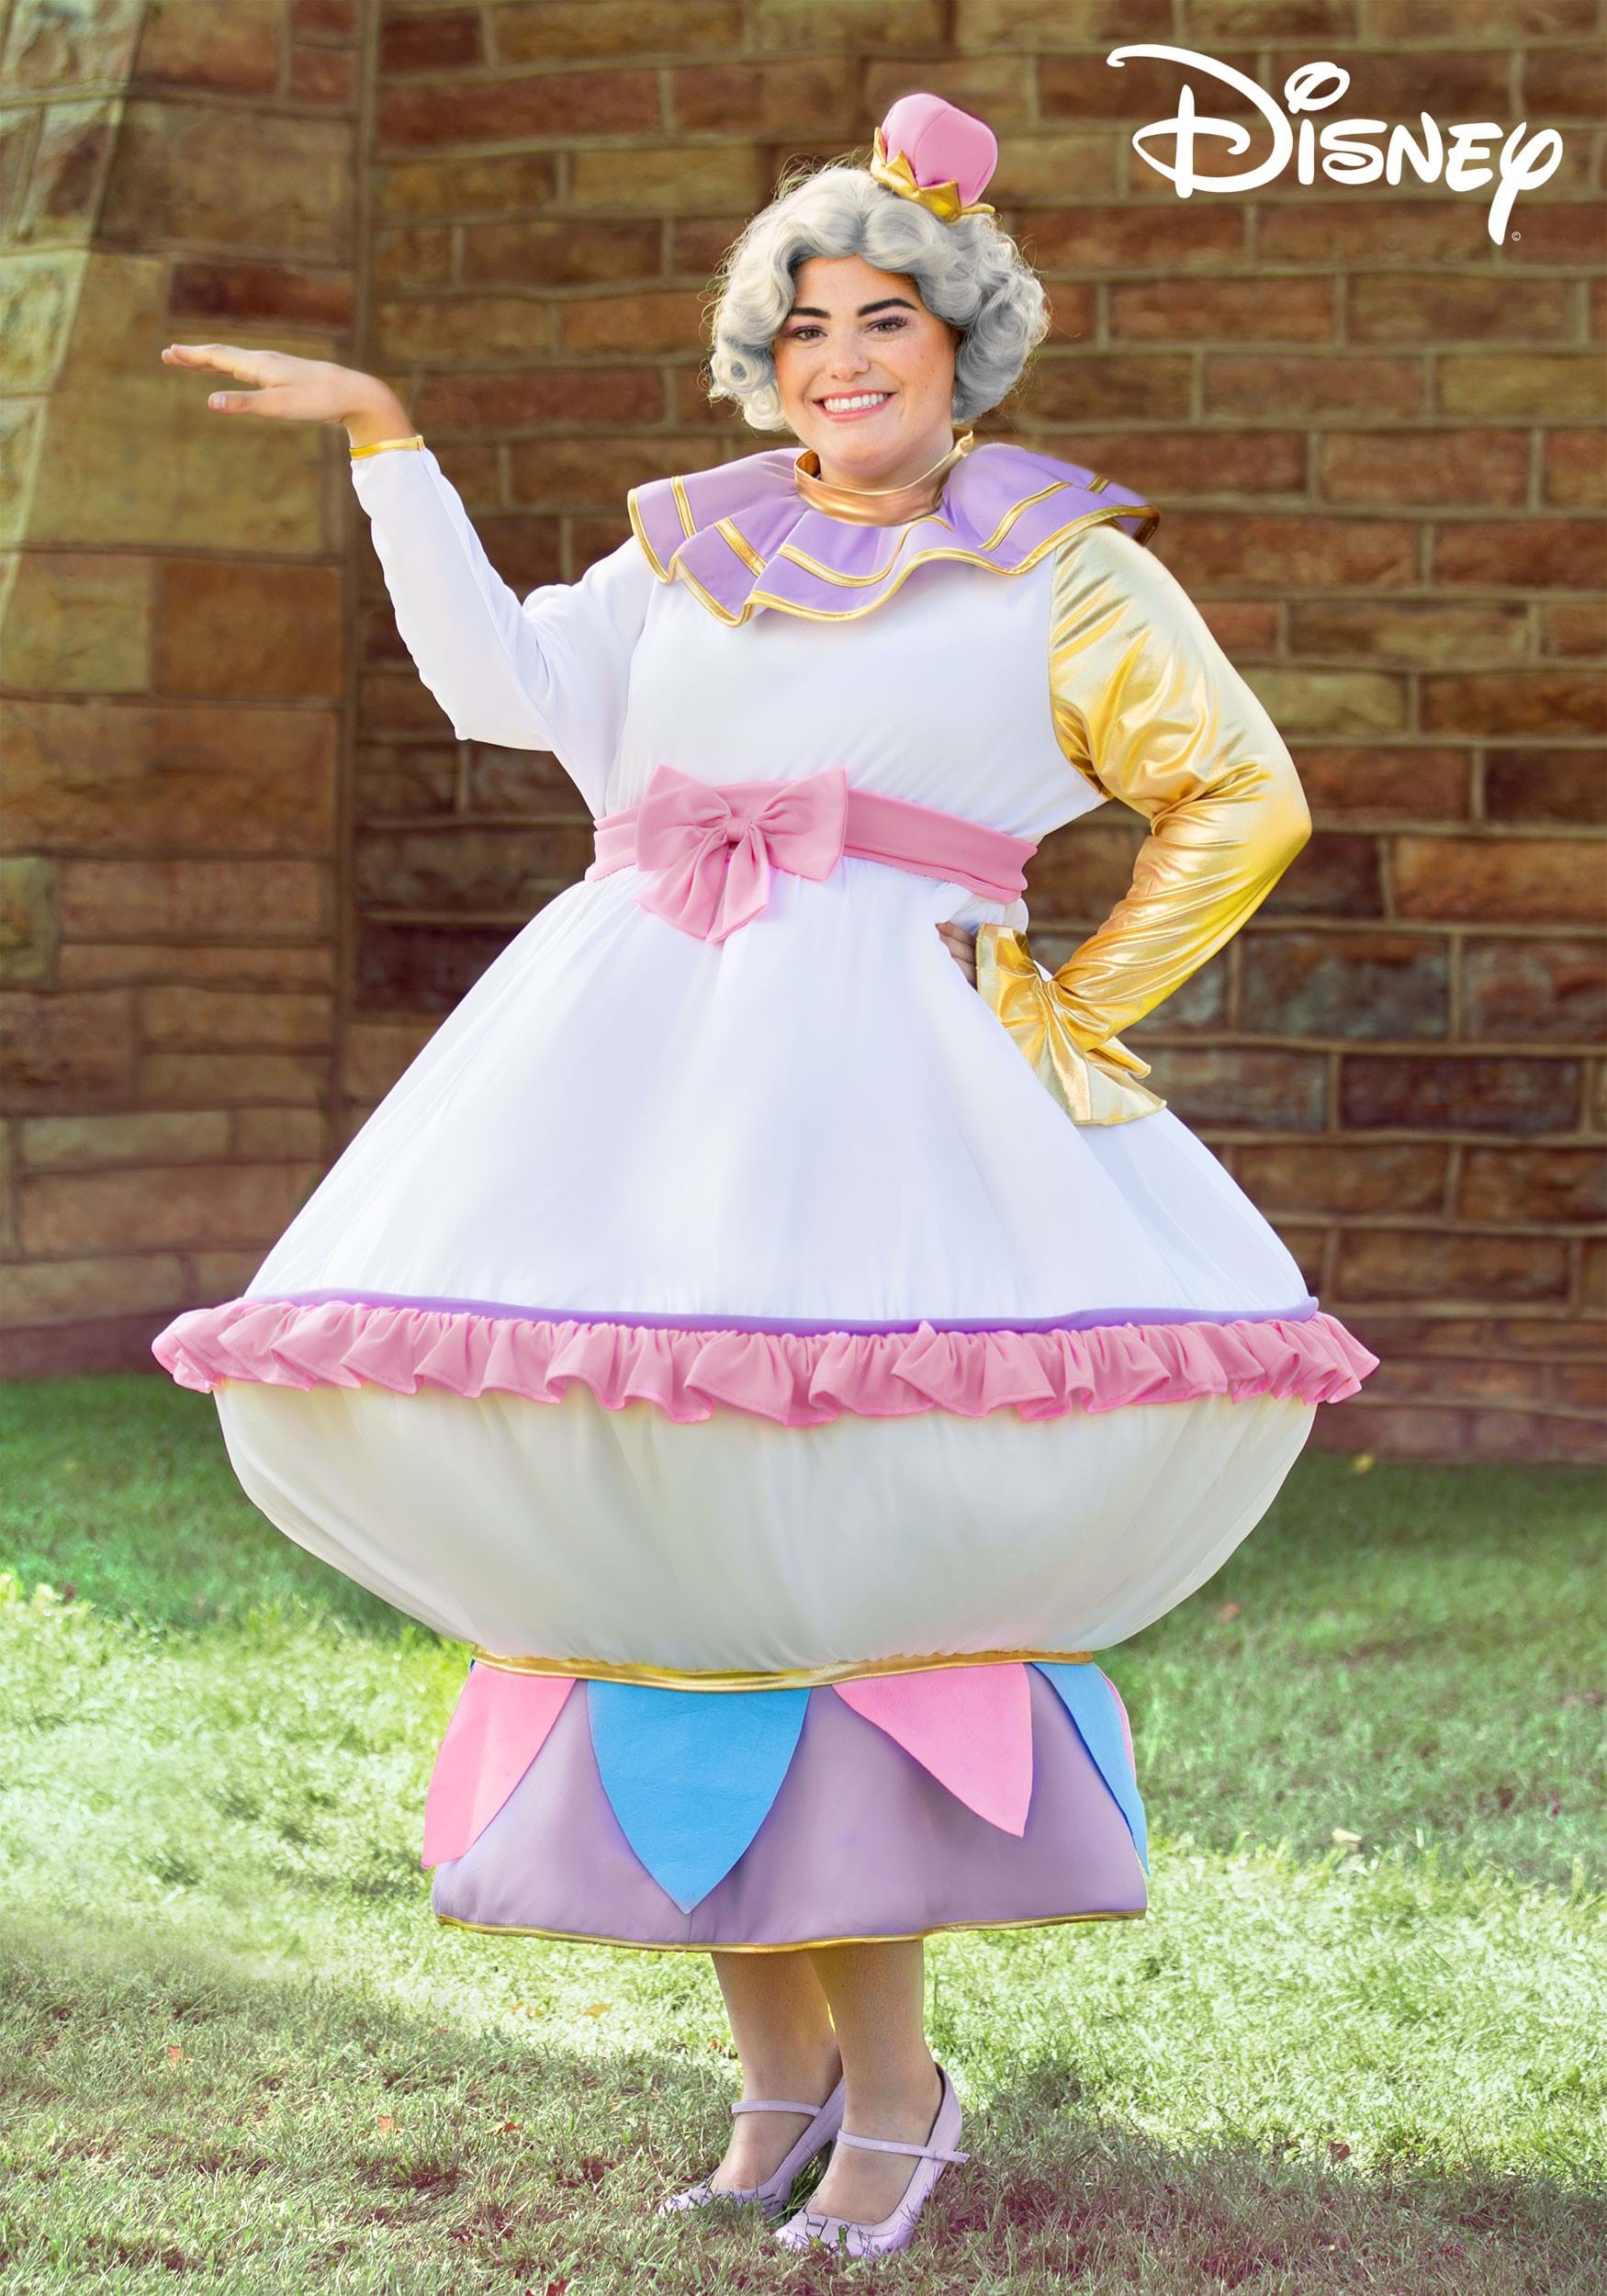 https://images.halloweencostumes.ca/products/64229/1-1/plus-size-beauty-and-the-beast-mrs-potts-costume-2.jpg